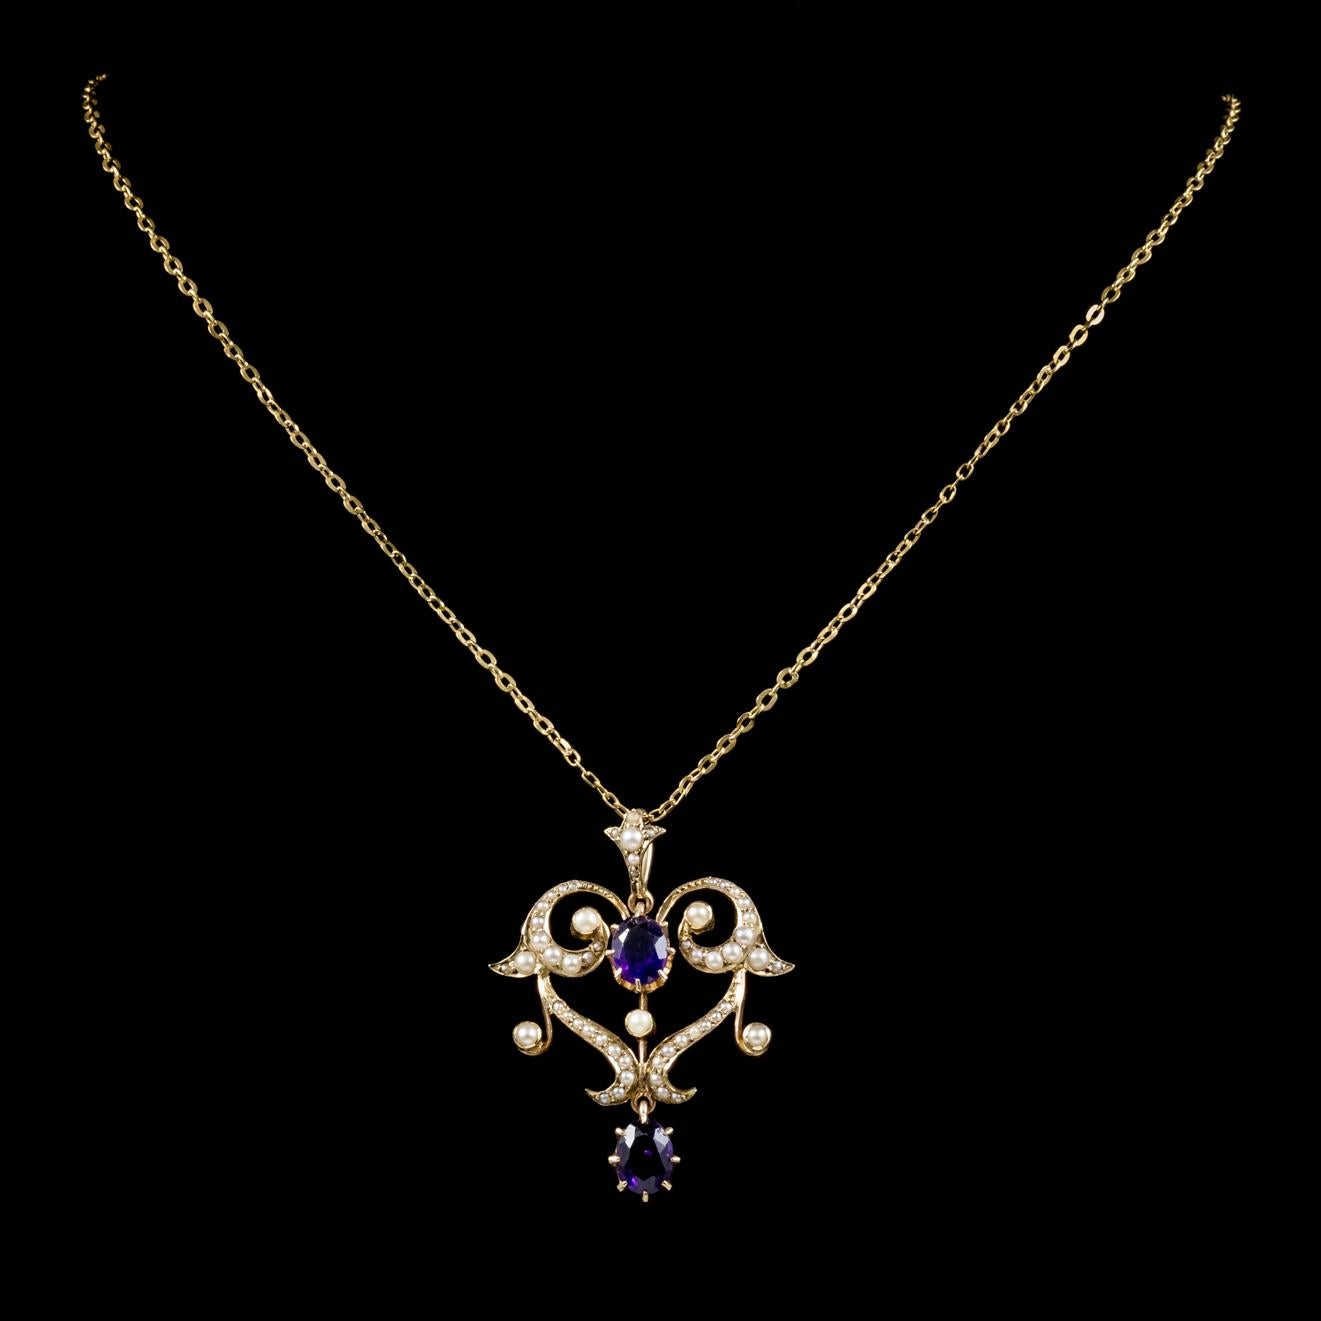 This beautiful antique Amethyst and Pearl pendant and chain is Victorian Circa 1880. 

Adorned with a 0.90ct Amethyst in the centre and a 0.90ct Amethyst dropper below. 

Amethyst has been highly esteemed throughout the ages for its stunning beauty